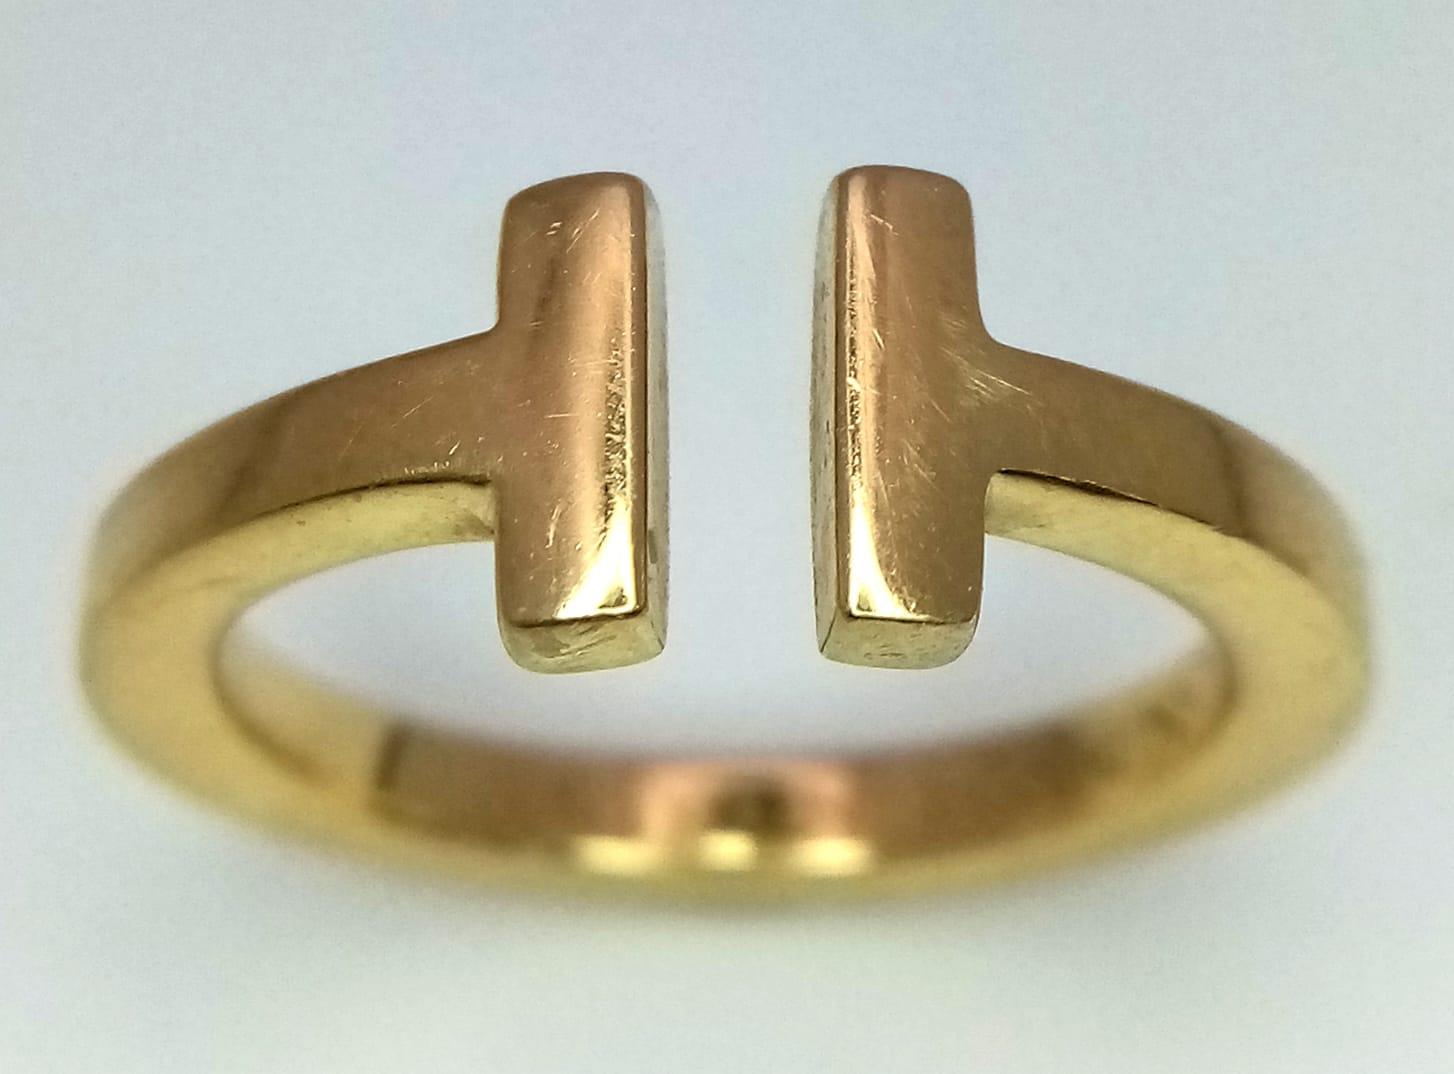 A TIFFANY & CO T SQUARE RING SET IN 18K YELLOW GOLD IN GOOD CONDITION, RRP £1900 SIZE N 5.8G - Image 3 of 5